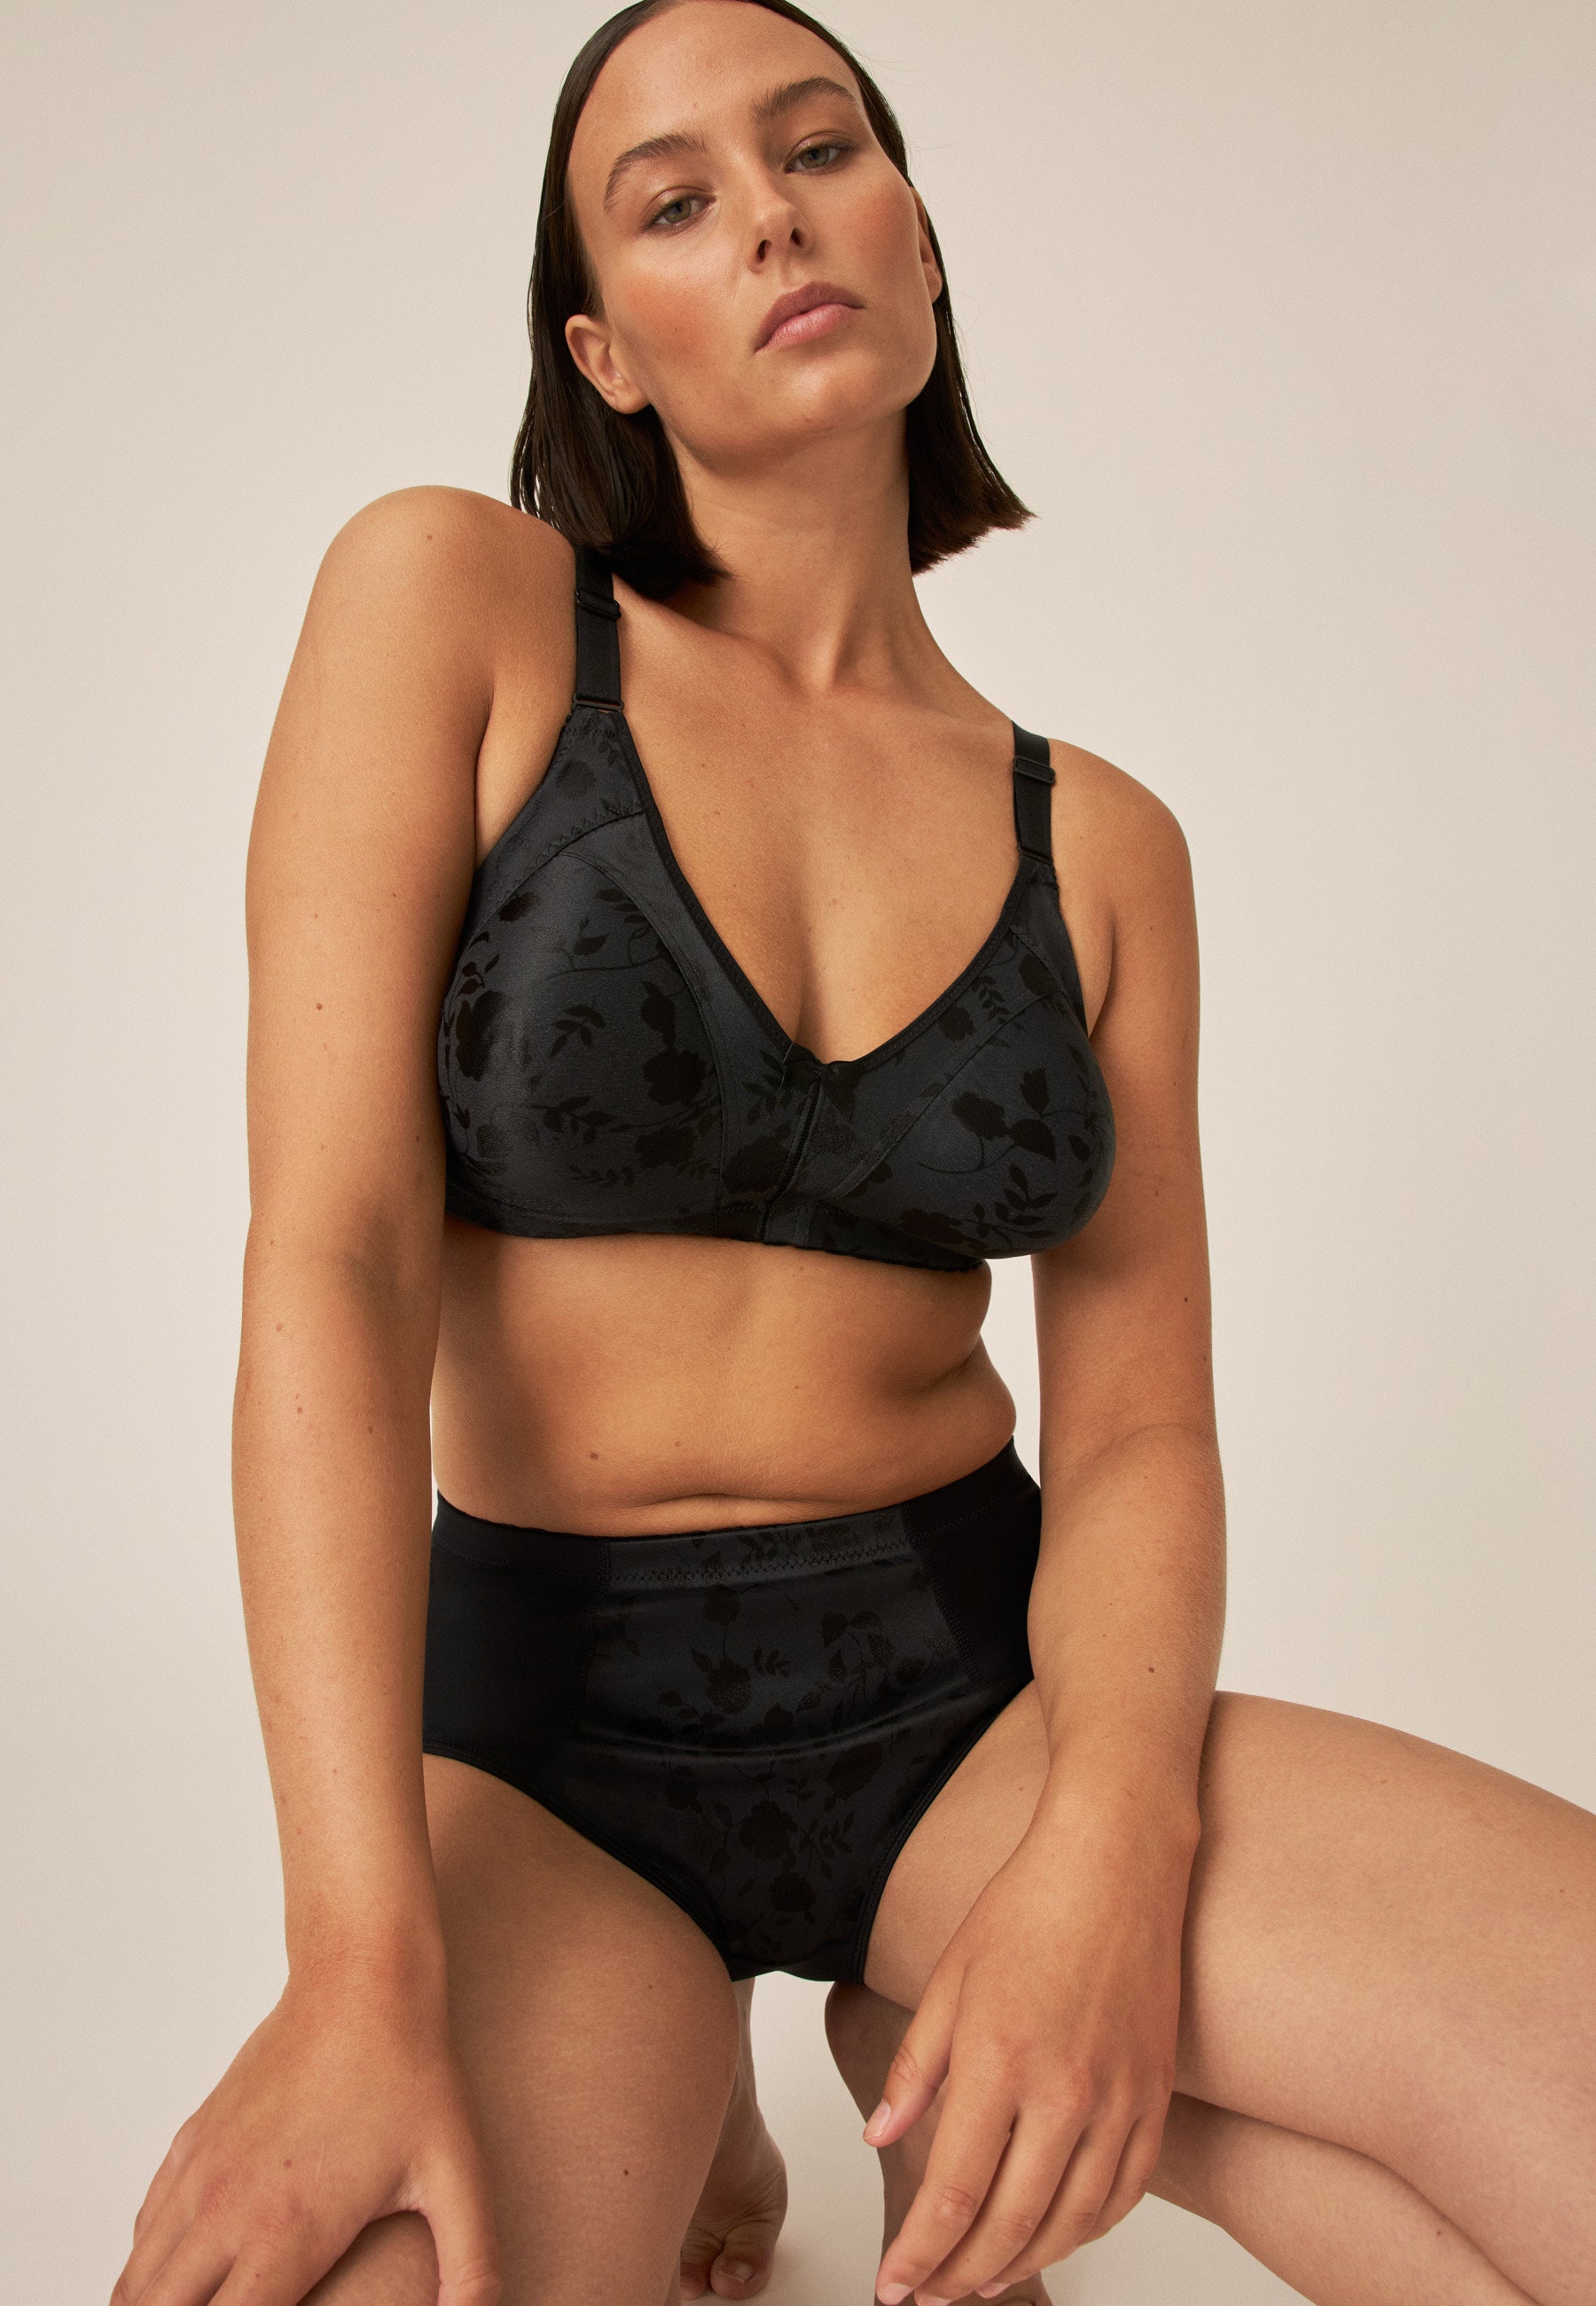 LARGE CUP Wireless FLORAL Bra With Wide Straps, Cotton Lined Soft Cup Black  European Minimizer Bra, Plus Size Stretch Lace Bra, Gift for Her -   Sweden